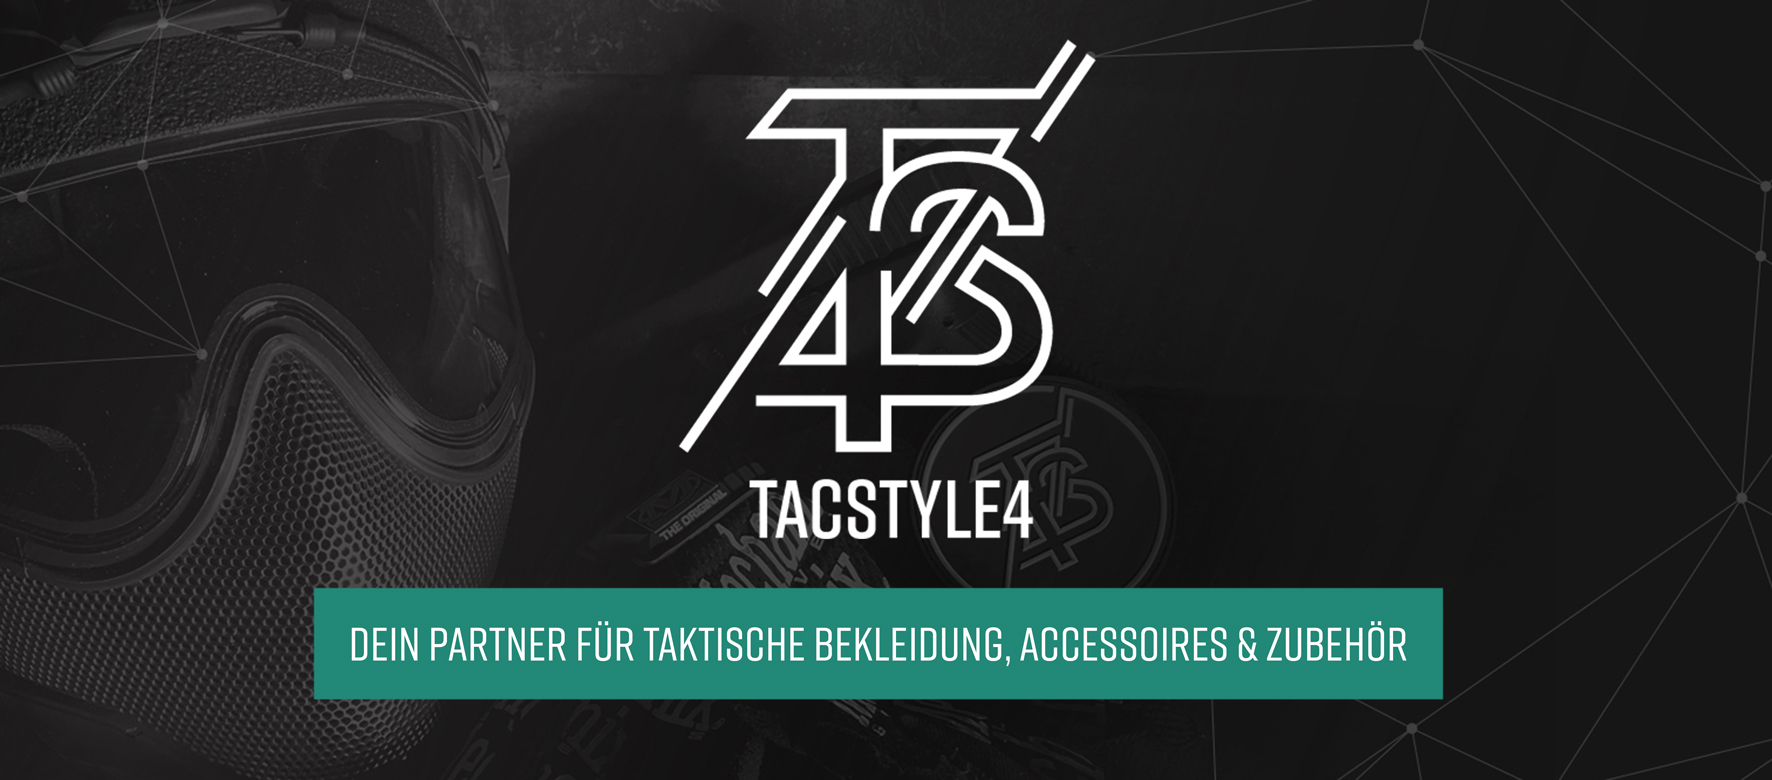 TacStyle4 / www.tacstyle4.de